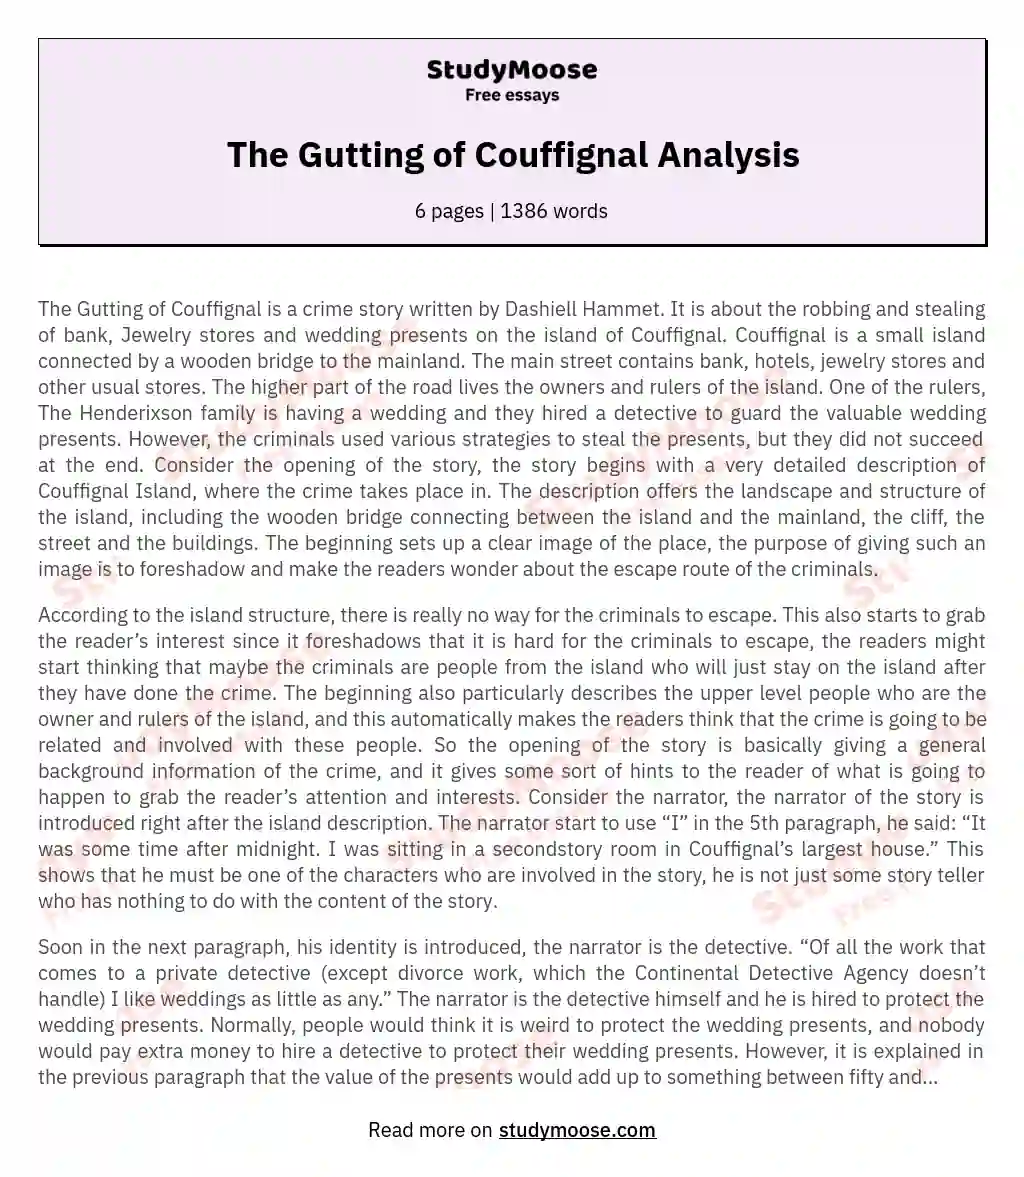 The Gutting of Couffignal Analysis essay